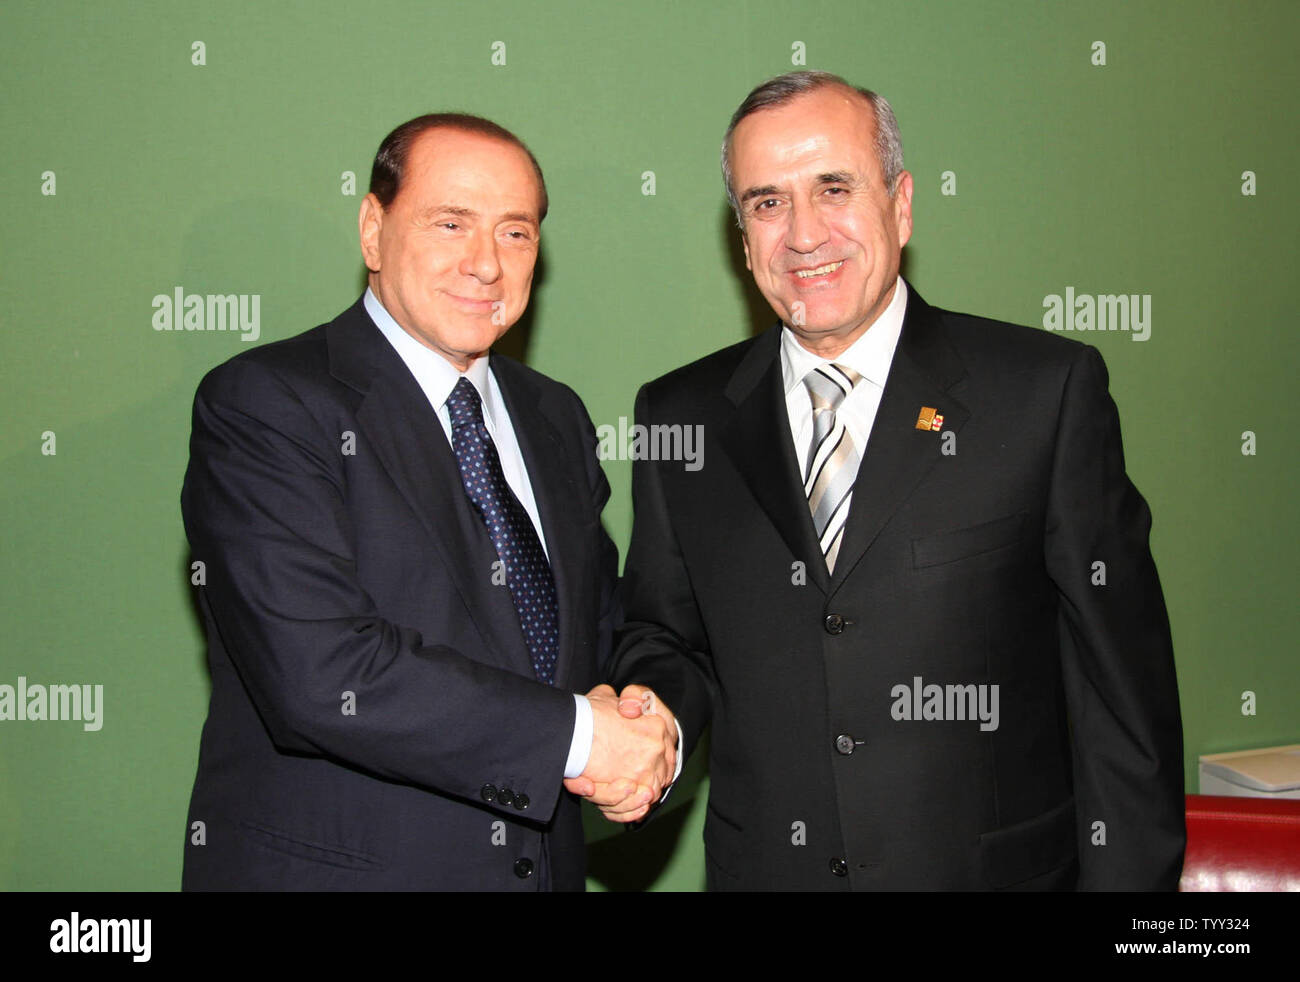 Lebanon's recently elected President, Michel Suleiman (R) is greeted by Italian Prime Minister Silvio Berlusconi during the Mediterranean Summit in Paris on July 13, 2008.  Forty-three nations from the Mediterranean, including Israel and Arab States, are attending the summit; one of the major topics being discussed is to create a weapon of mass destruction free zone in the Mediterranean. (UPI Photo/Dalati & Nohra) Stock Photo